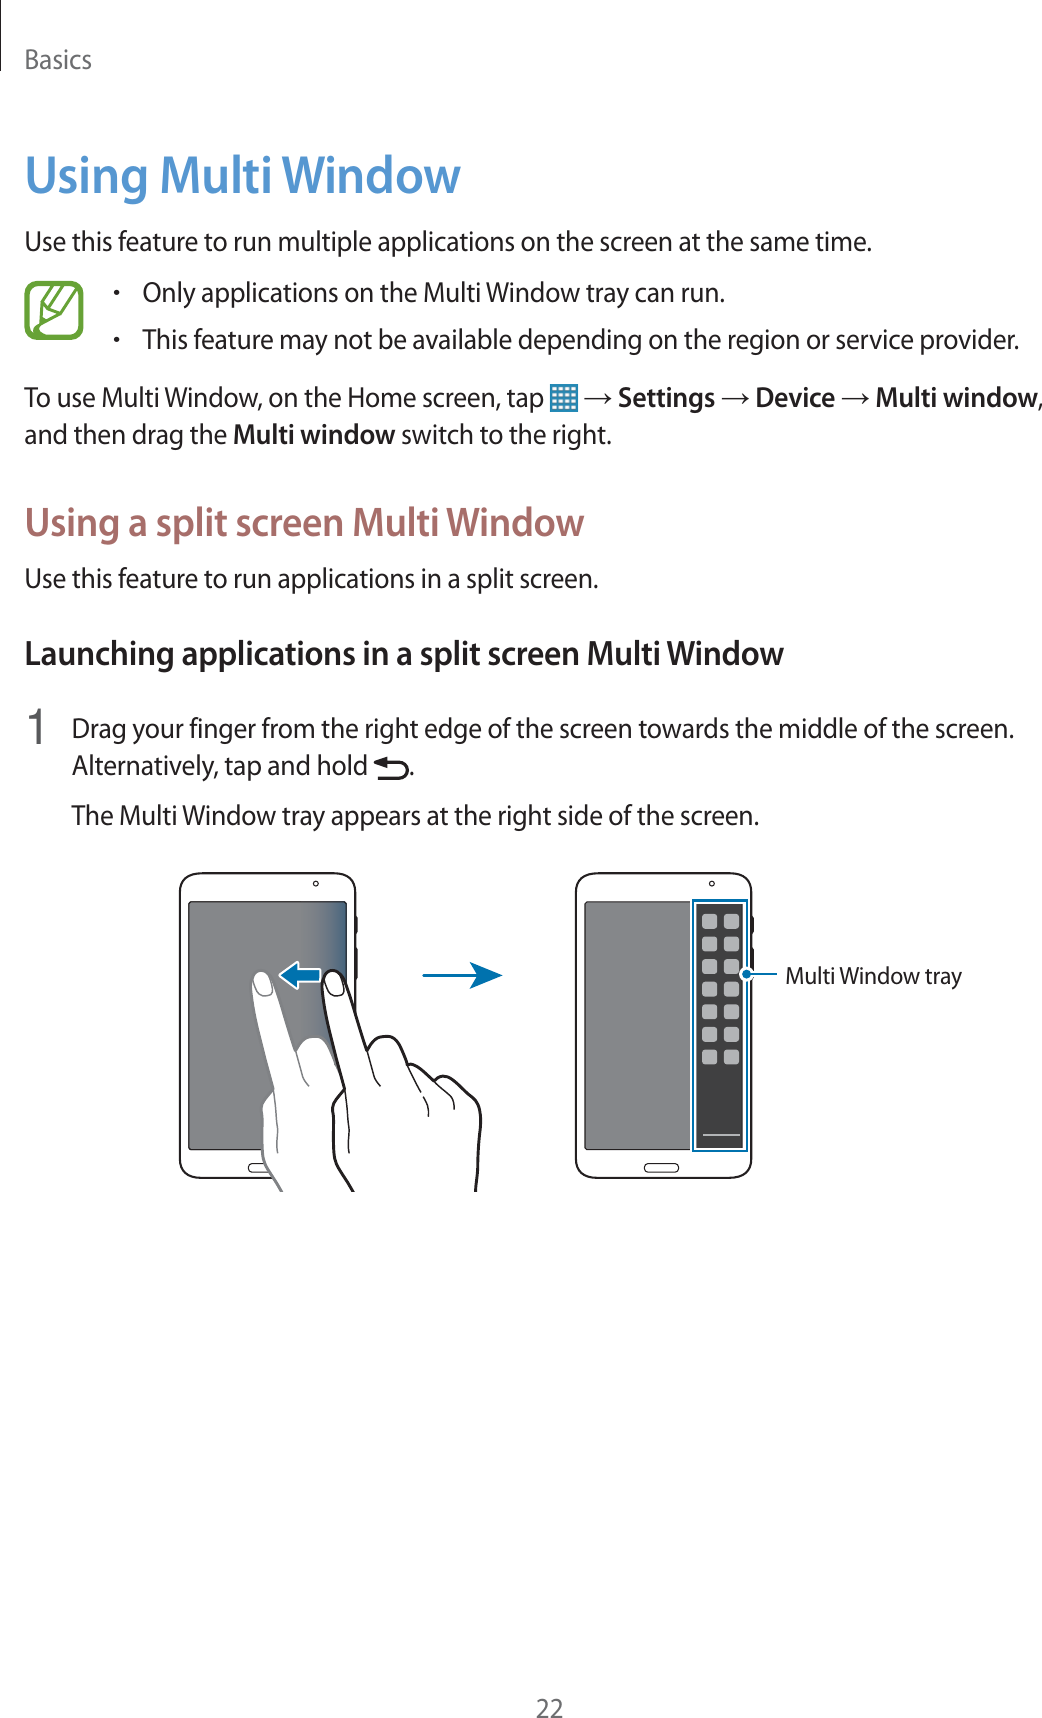 Basics22Using Multi WindowUse this feature to run multiple applications on the screen at the same time.rOnly applications on the Multi Window tray can run.rThis feature may not be available depending on the region or service provider.To use Multi Window, on the Home screen, tap   ĺ Settings ĺ Device ĺ Multi window, and then drag the Multi window switch to the right.Using a split screen Multi WindowUse this feature to run applications in a split screen.Launching applications in a split screen Multi Window1  Drag your finger from the right edge of the screen towards the middle of the screen. Alternatively, tap and hold  .The Multi Window tray appears at the right side of the screen.Multi Window tray